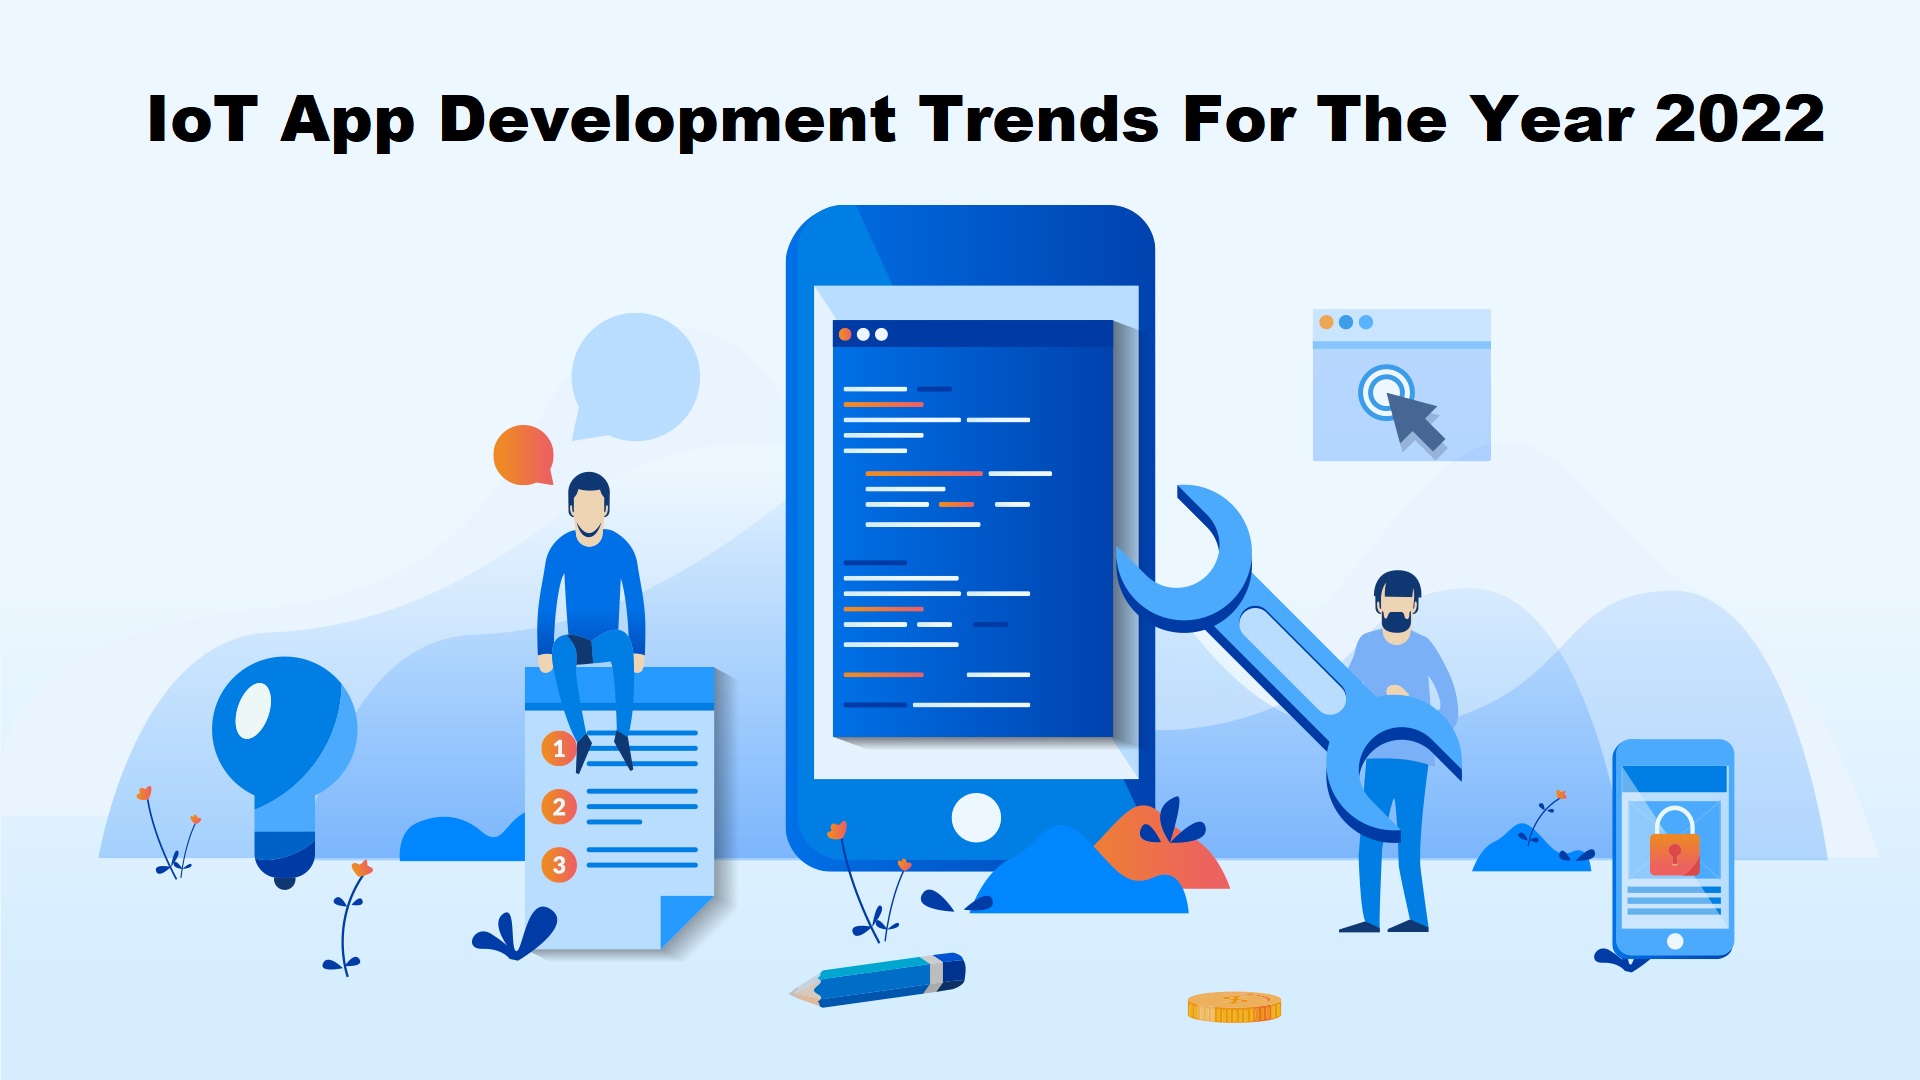 IoT App Development Trends For The Year 2022